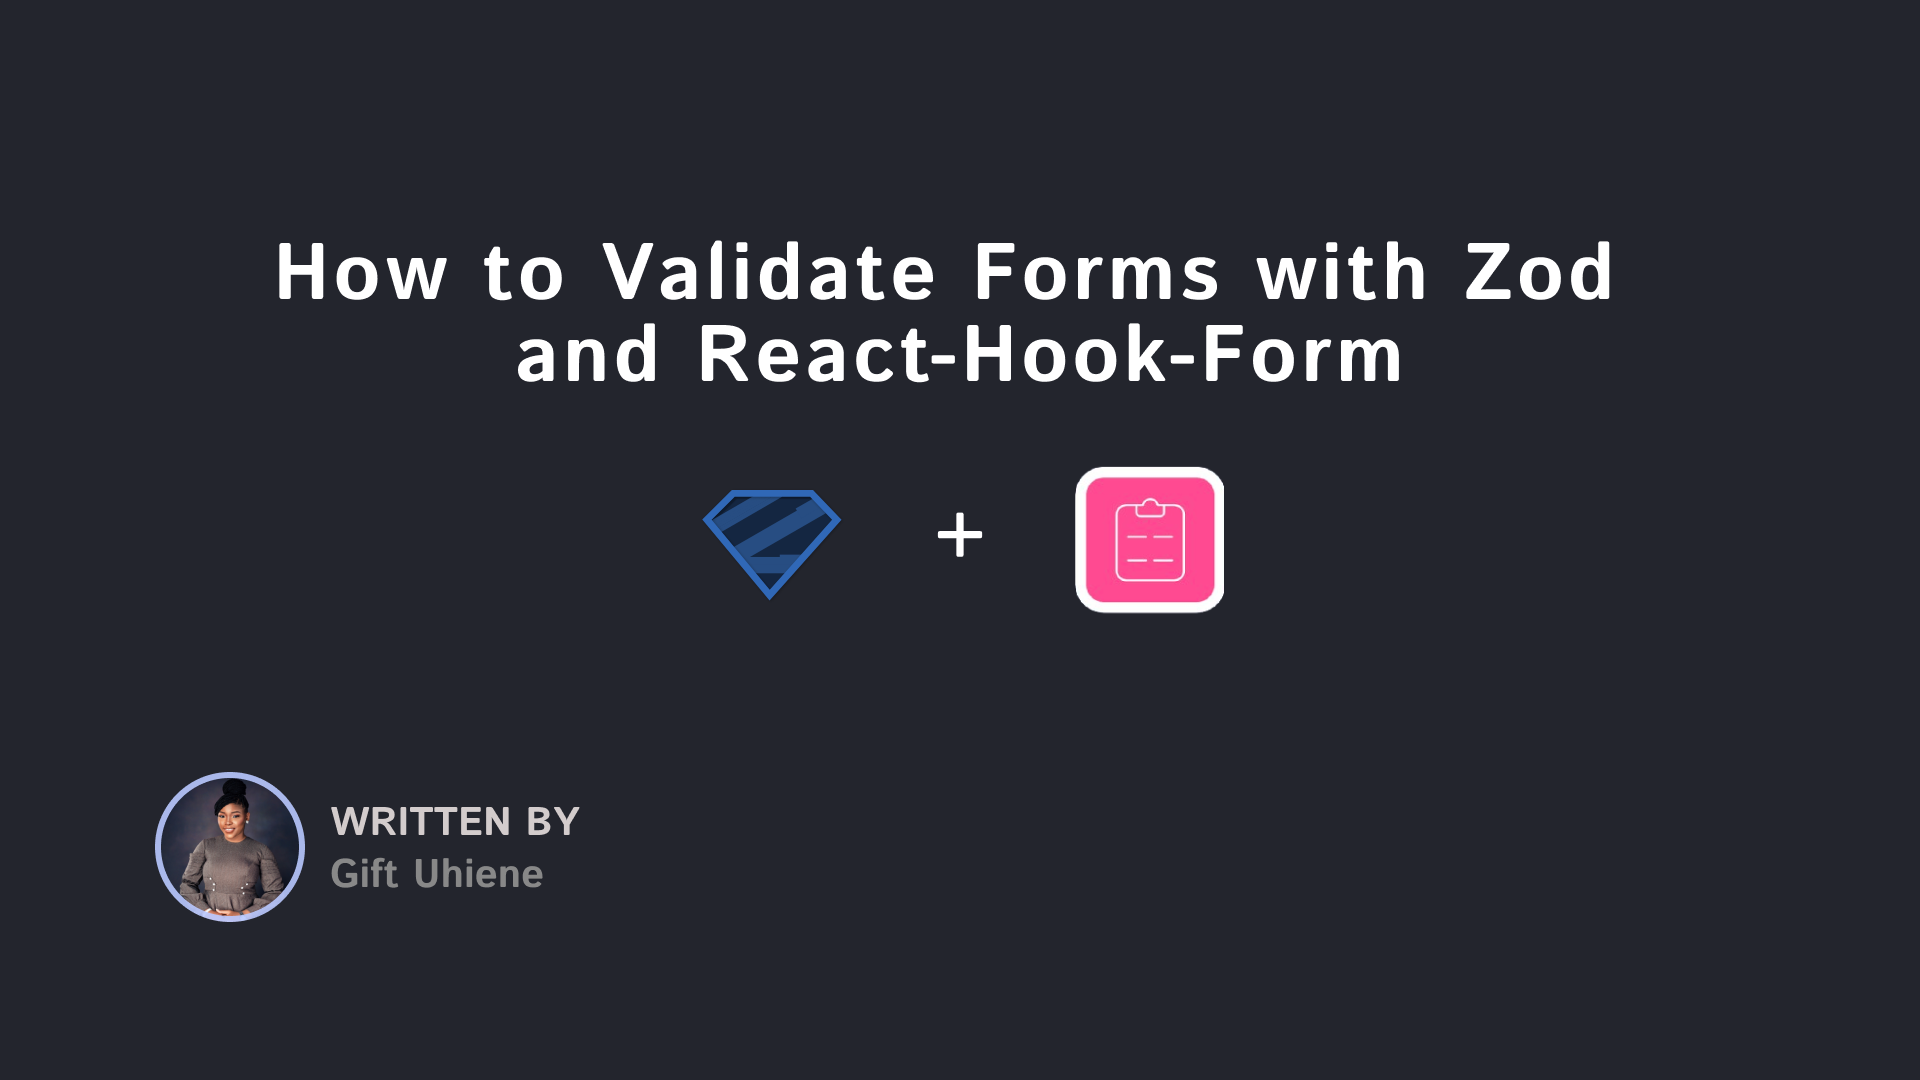 How to Validate Forms with Zod and React-Hook-Form